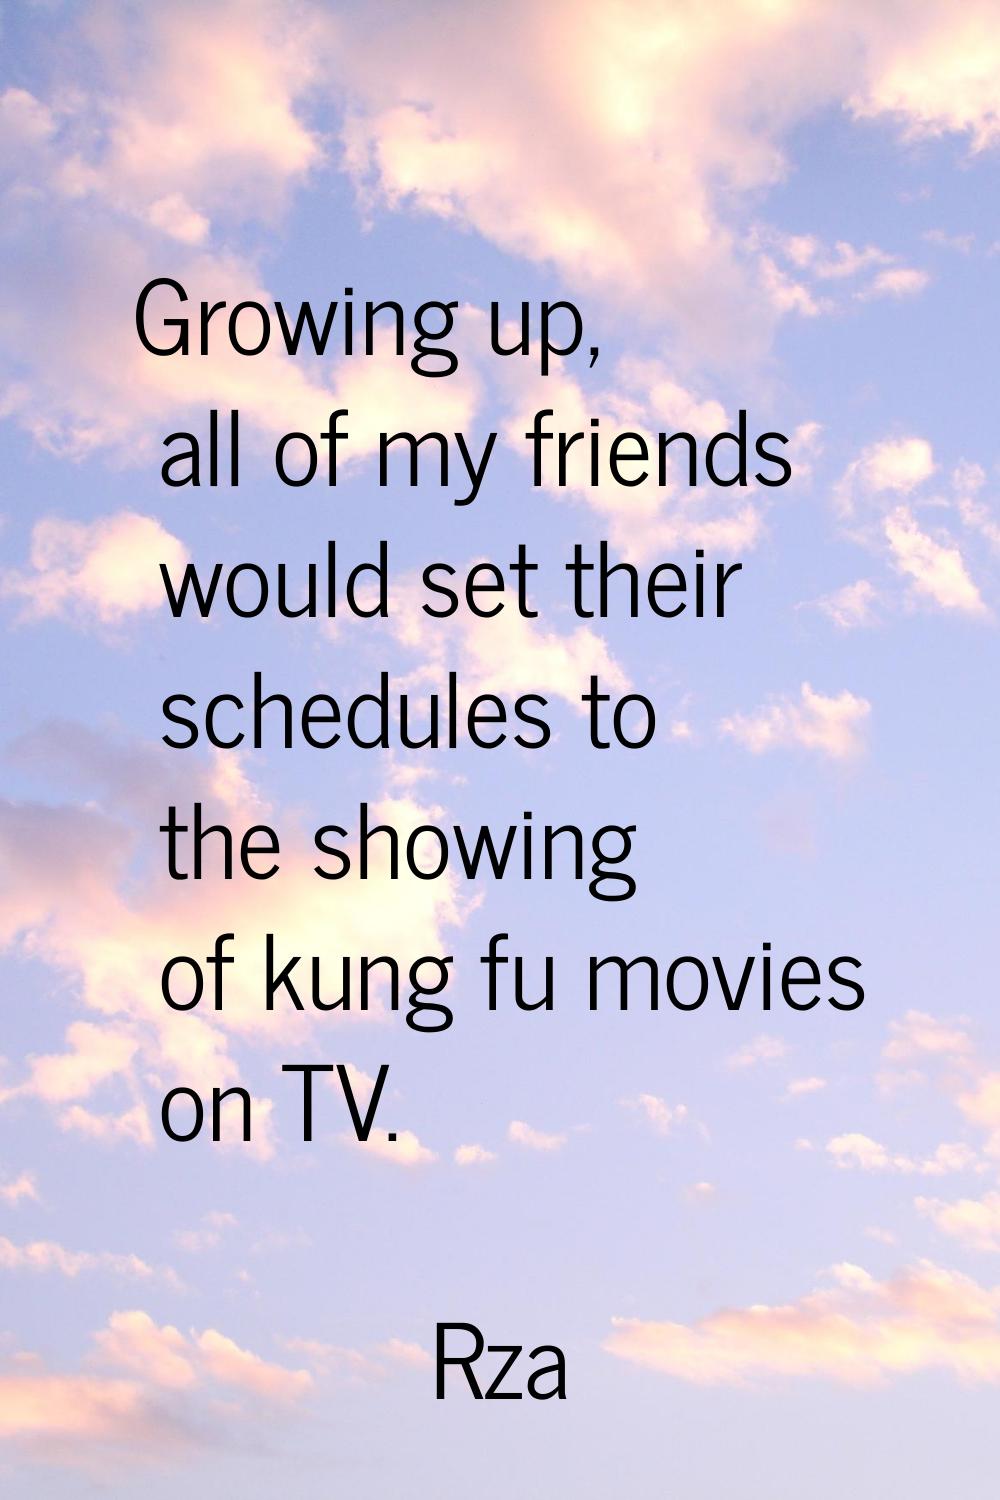 Growing up, all of my friends would set their schedules to the showing of kung fu movies on TV.